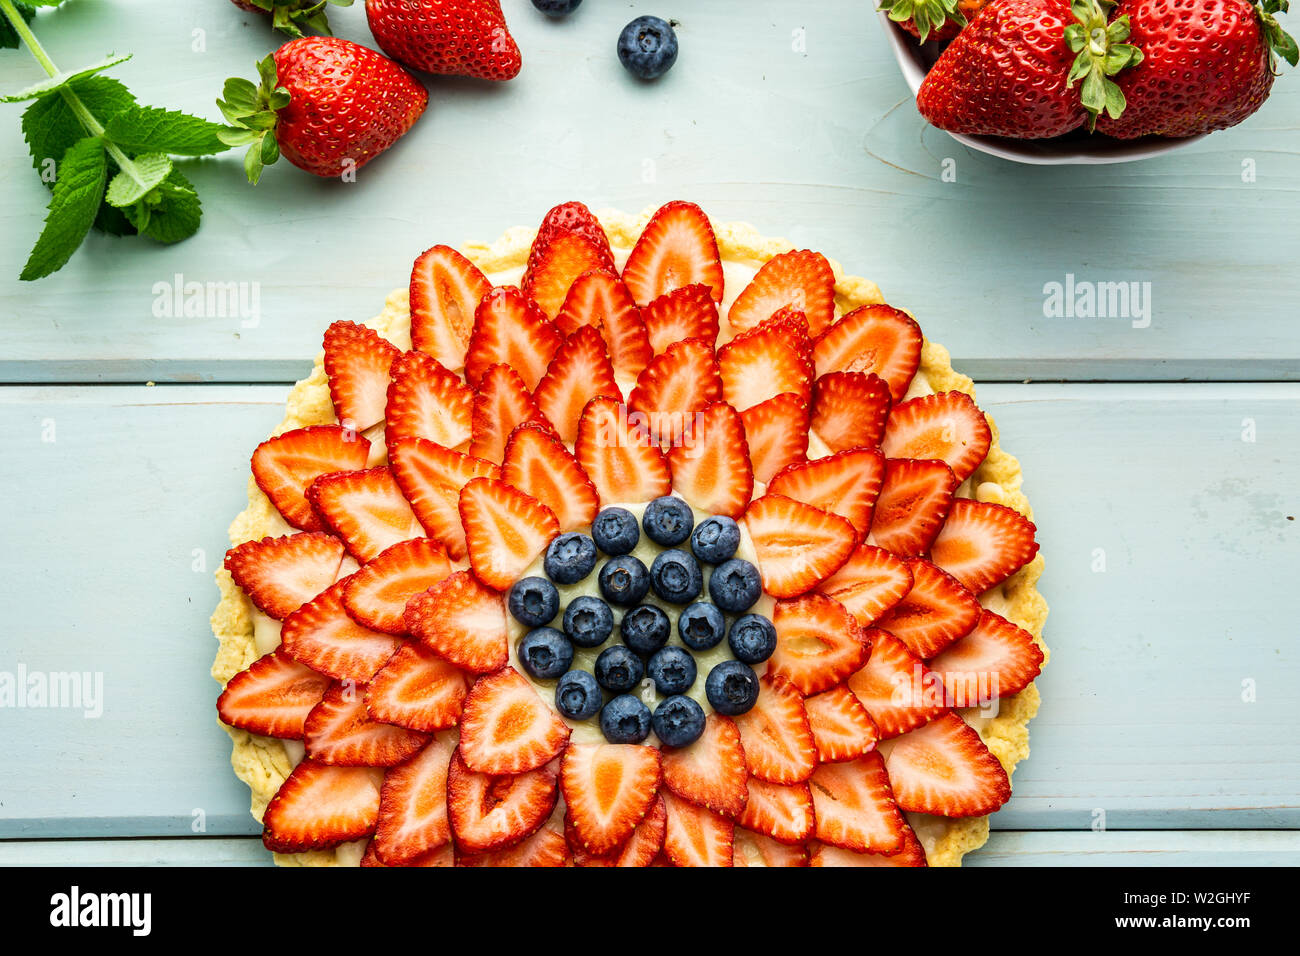 Cake with berries Pie with strawberries and blueberries on blue rustic table. Stock Photo